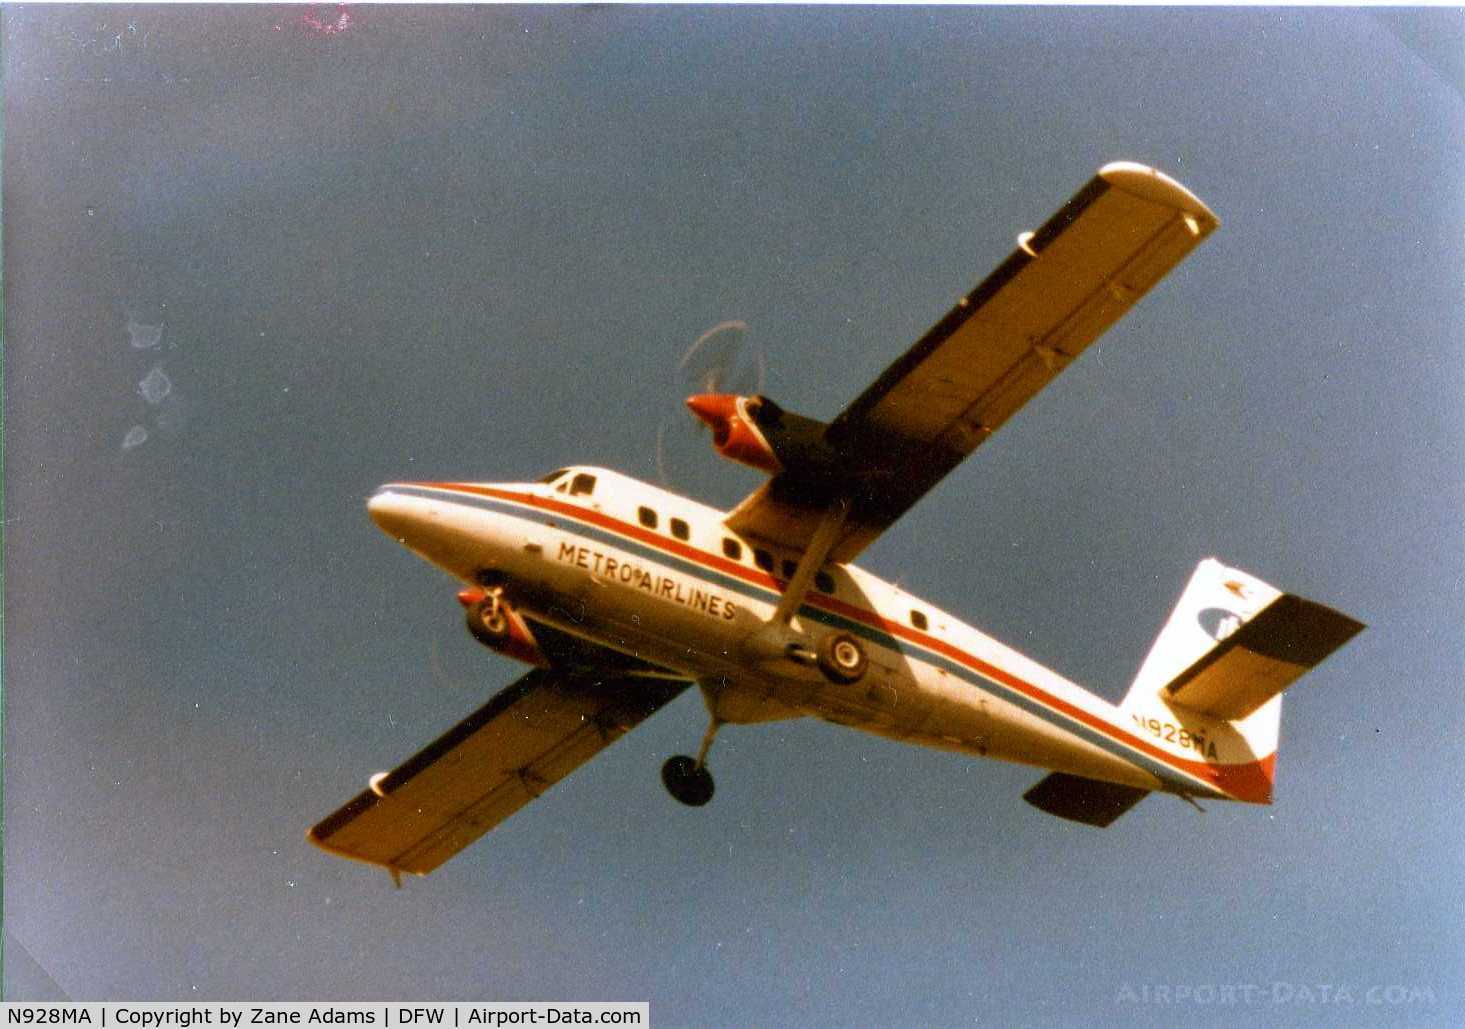 N928MA, 1969 De Havilland Canada DHC-6-300 Twin Otter C/N 269, Twin Otter - Metro Airlines